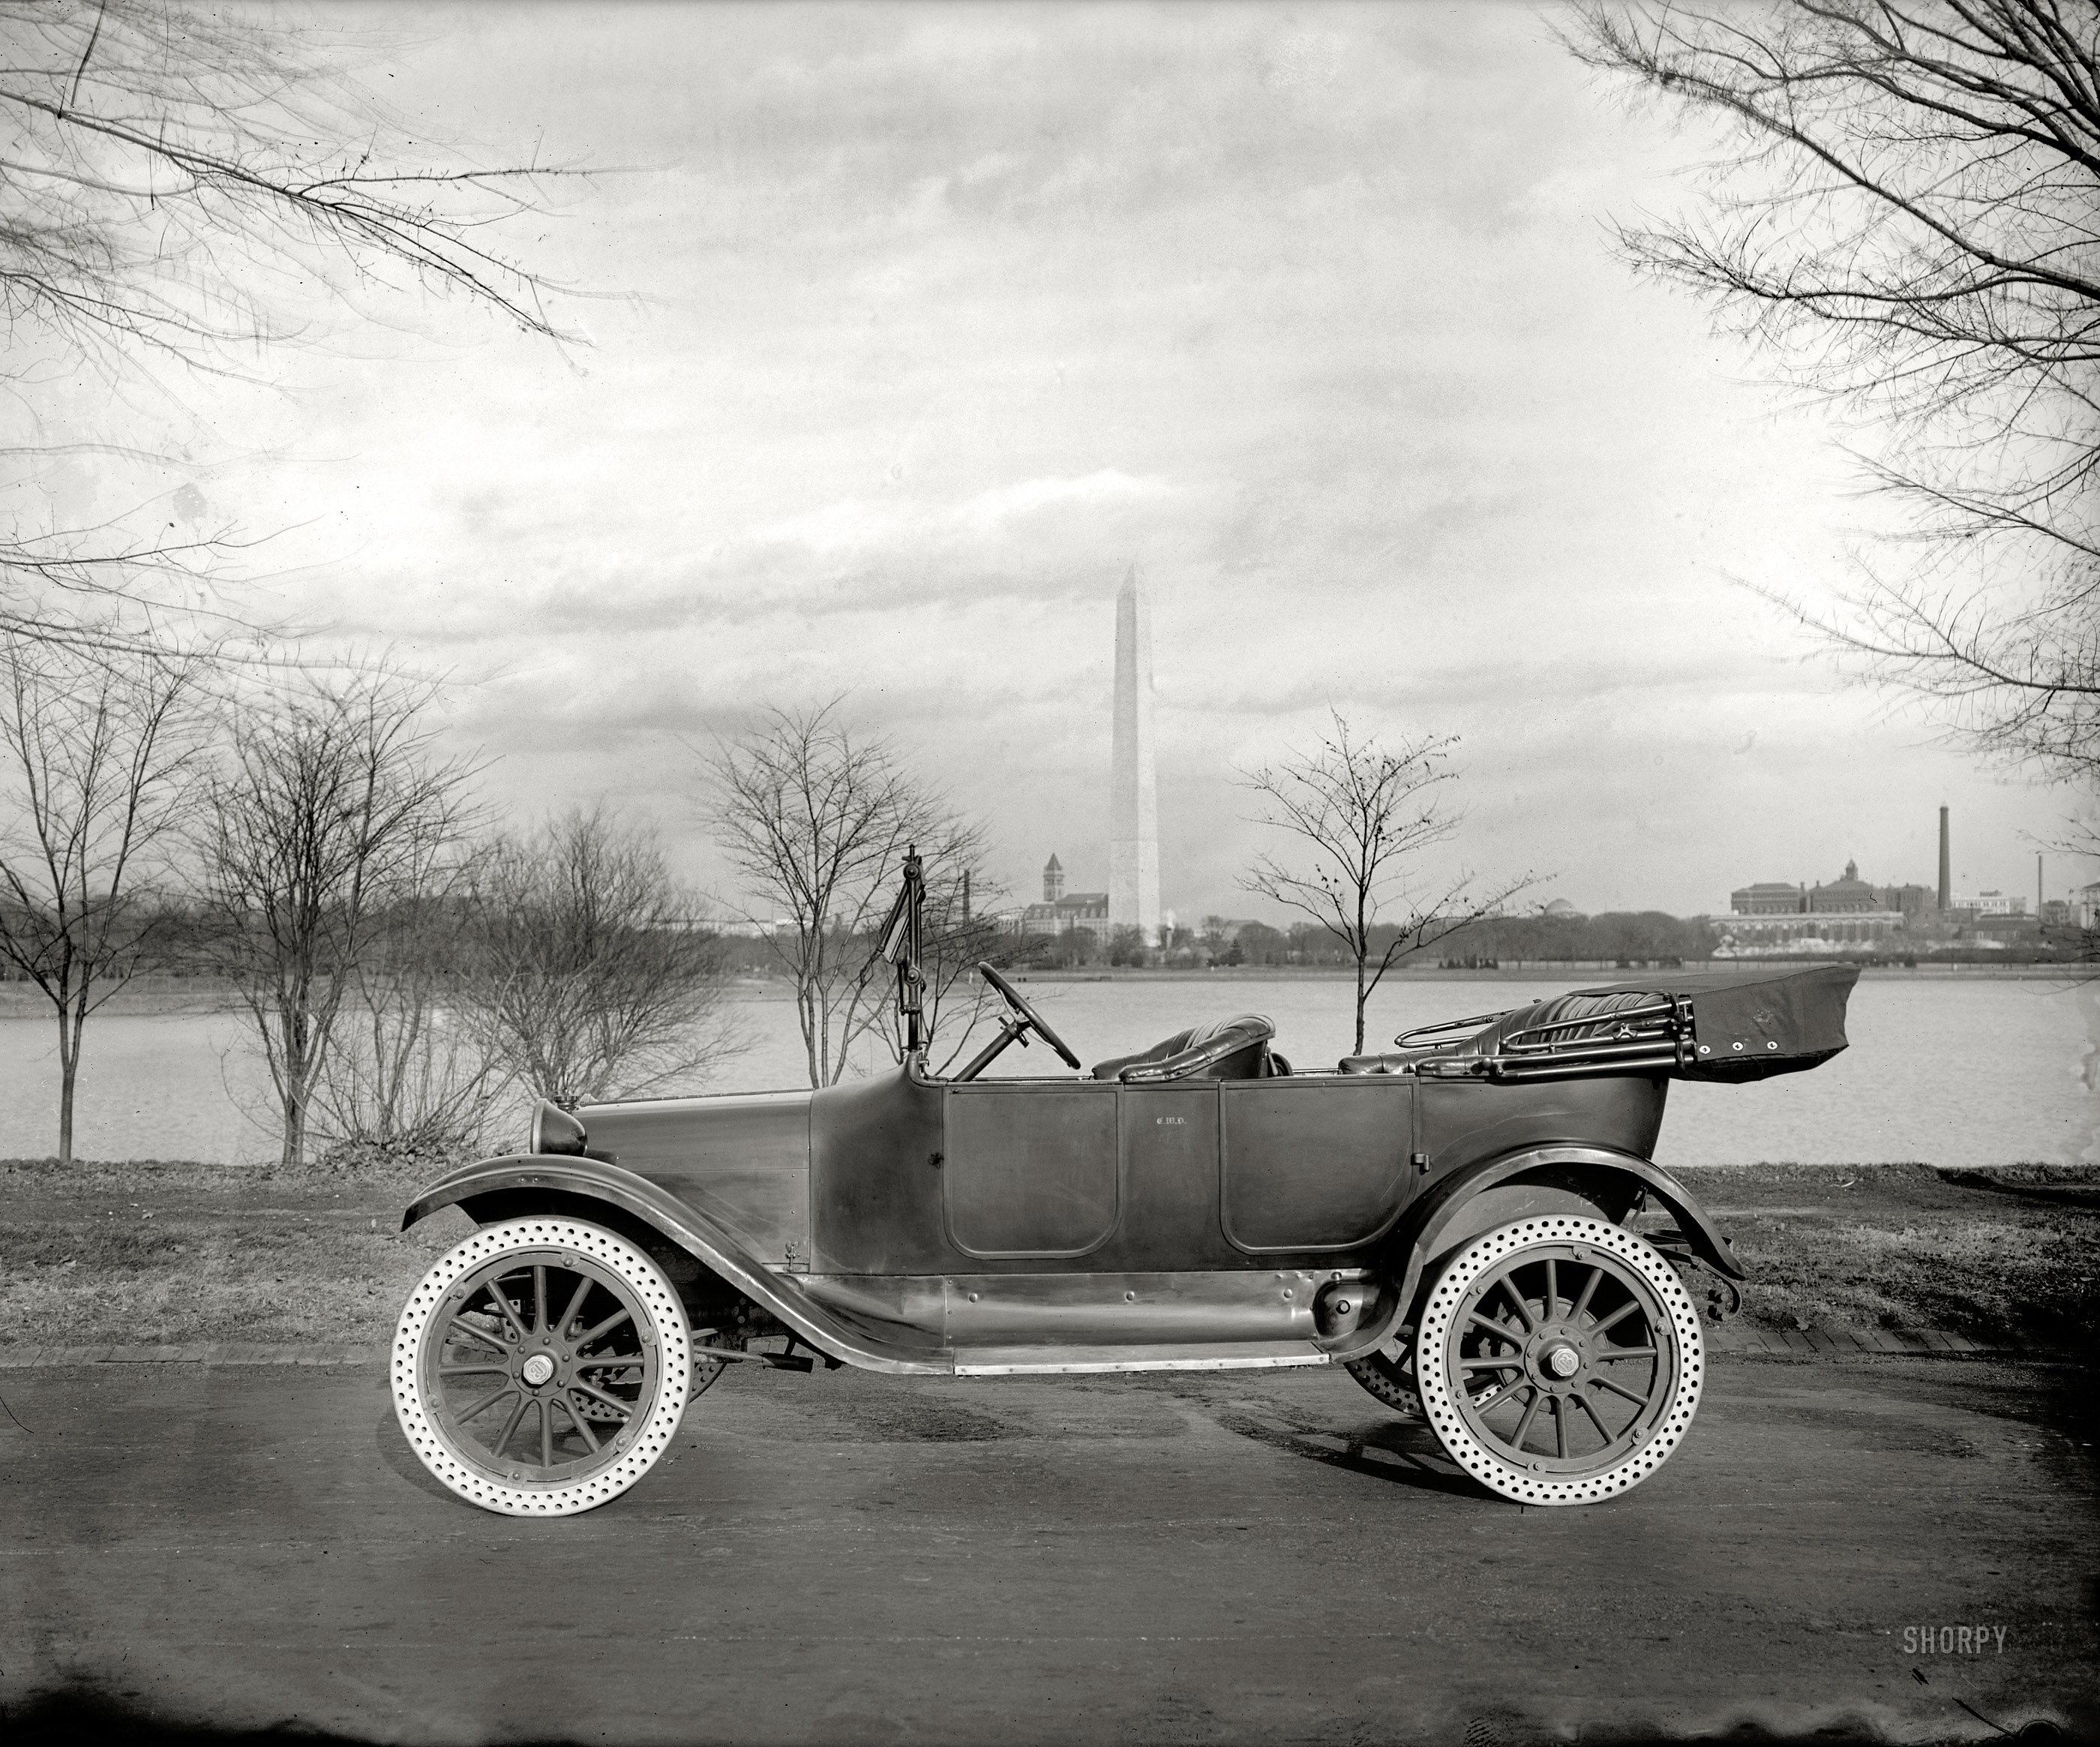 Washington, D.C., circa 1920. "Draper auto." A Dodge touring car bearing the initials of Charles W. Draper and equipped with solid rubber tires similar to the Trublprufs seen in his store window. National Photo Co. View full size.